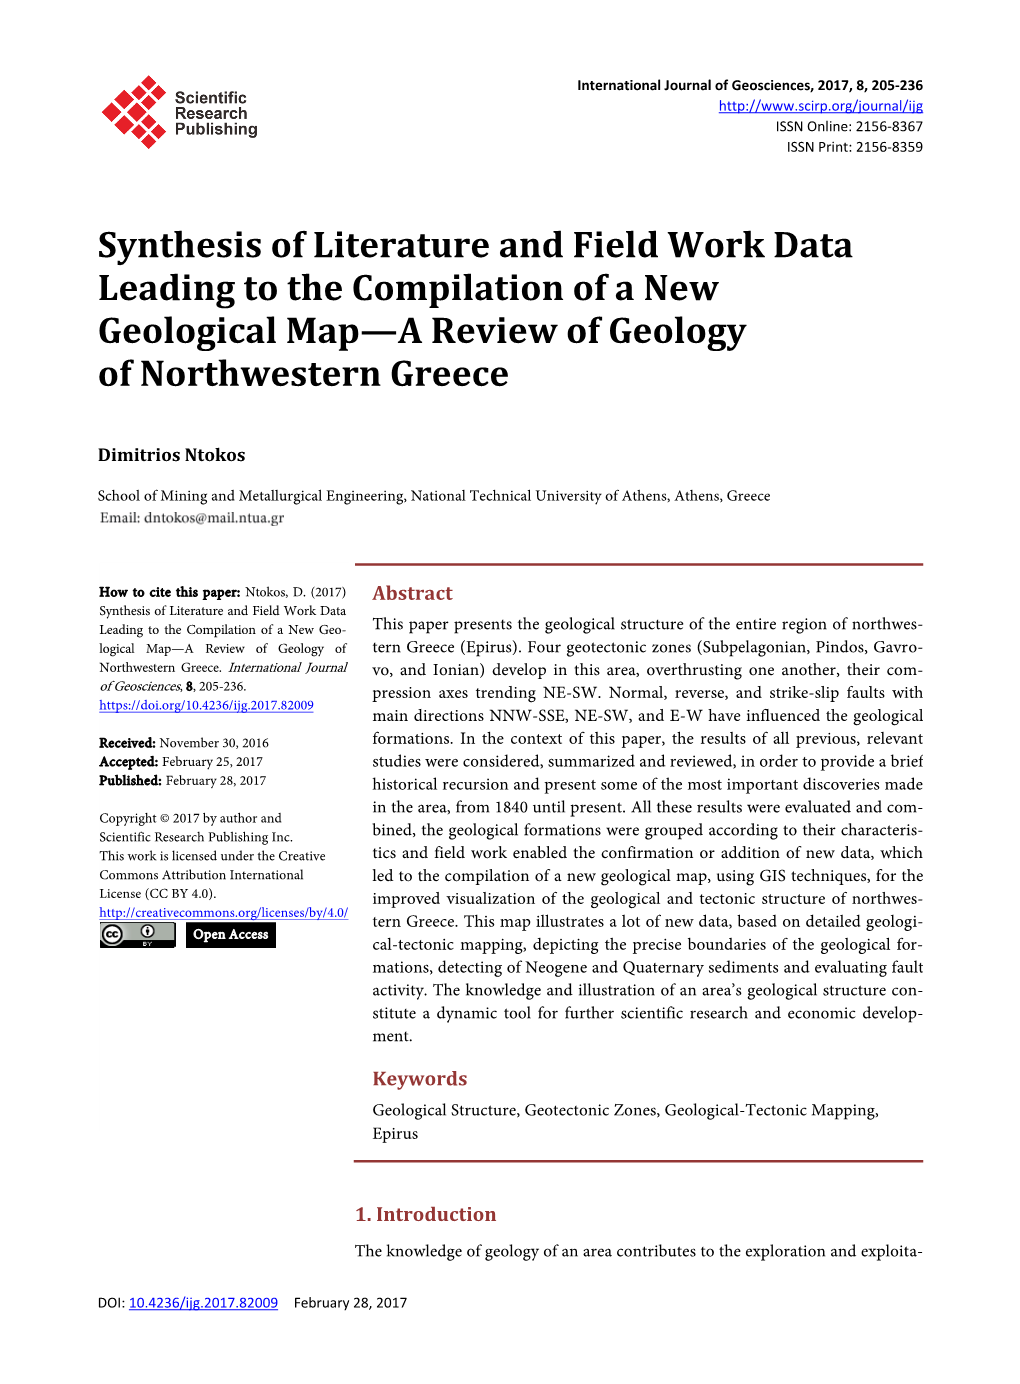 Synthesis of Literature and Field Work Data Leading to the Compilation of a New Geological Map—A Review of Geology of Northwestern Greece